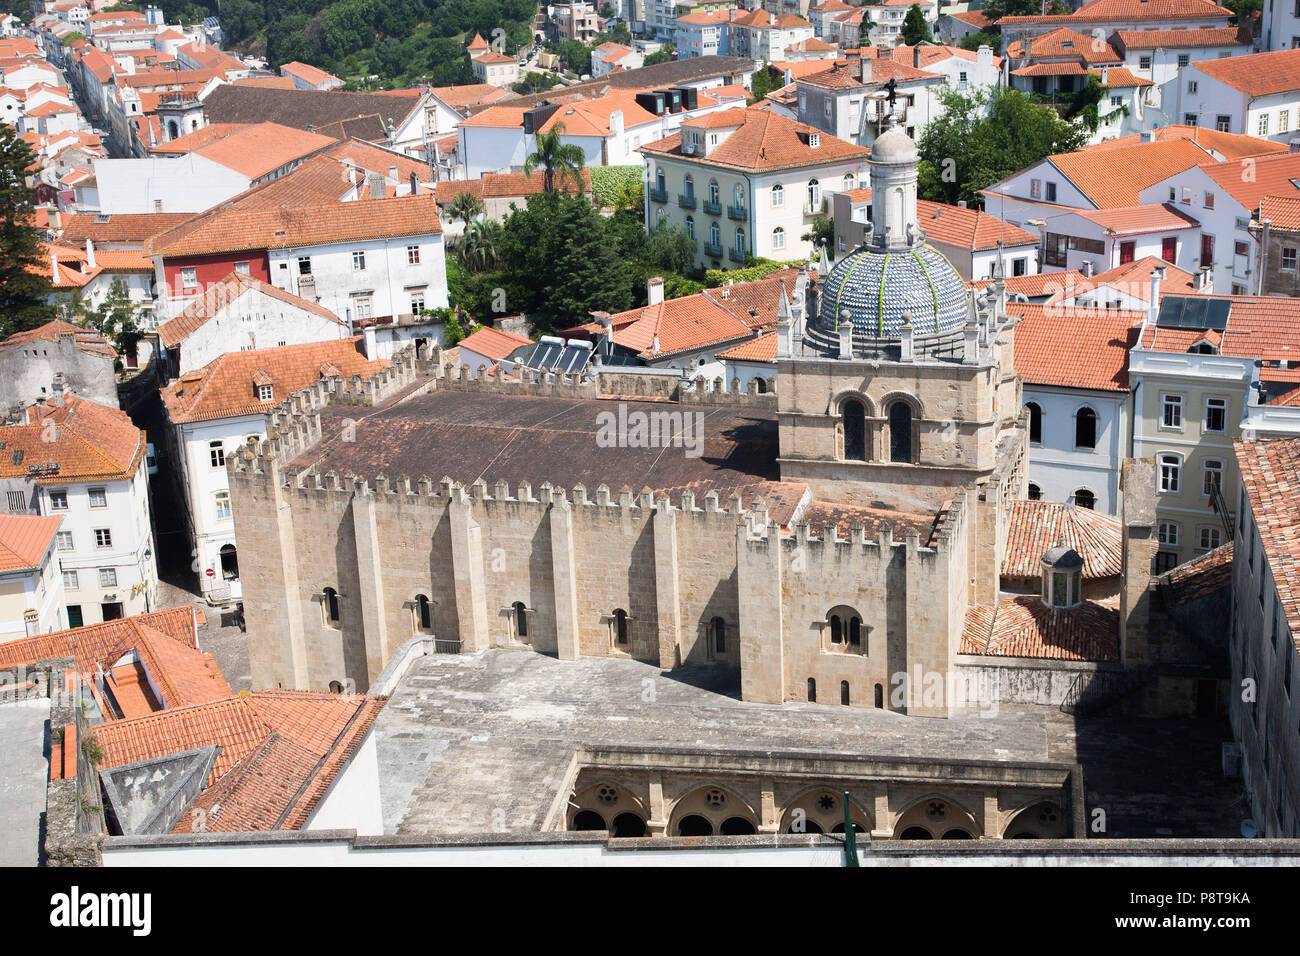 The old, Romanesque (early 13th century), Cathedral at Coimbra, Portugal Stock Photo